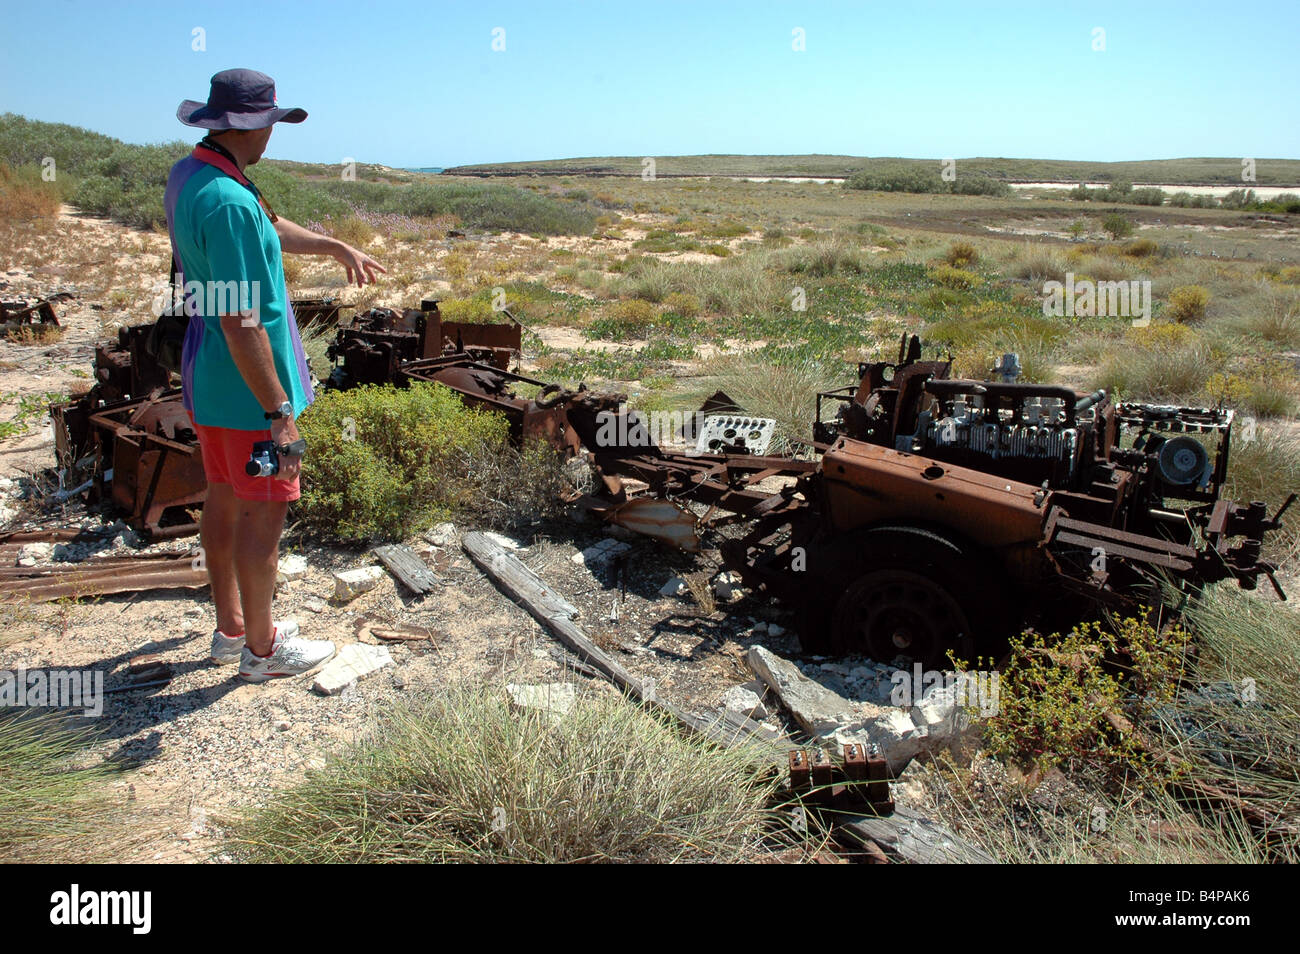 A man inspects the rusting remains of a military vehicle on Trimouille Island in the Montebello Islands of Western Australia Stock Photo